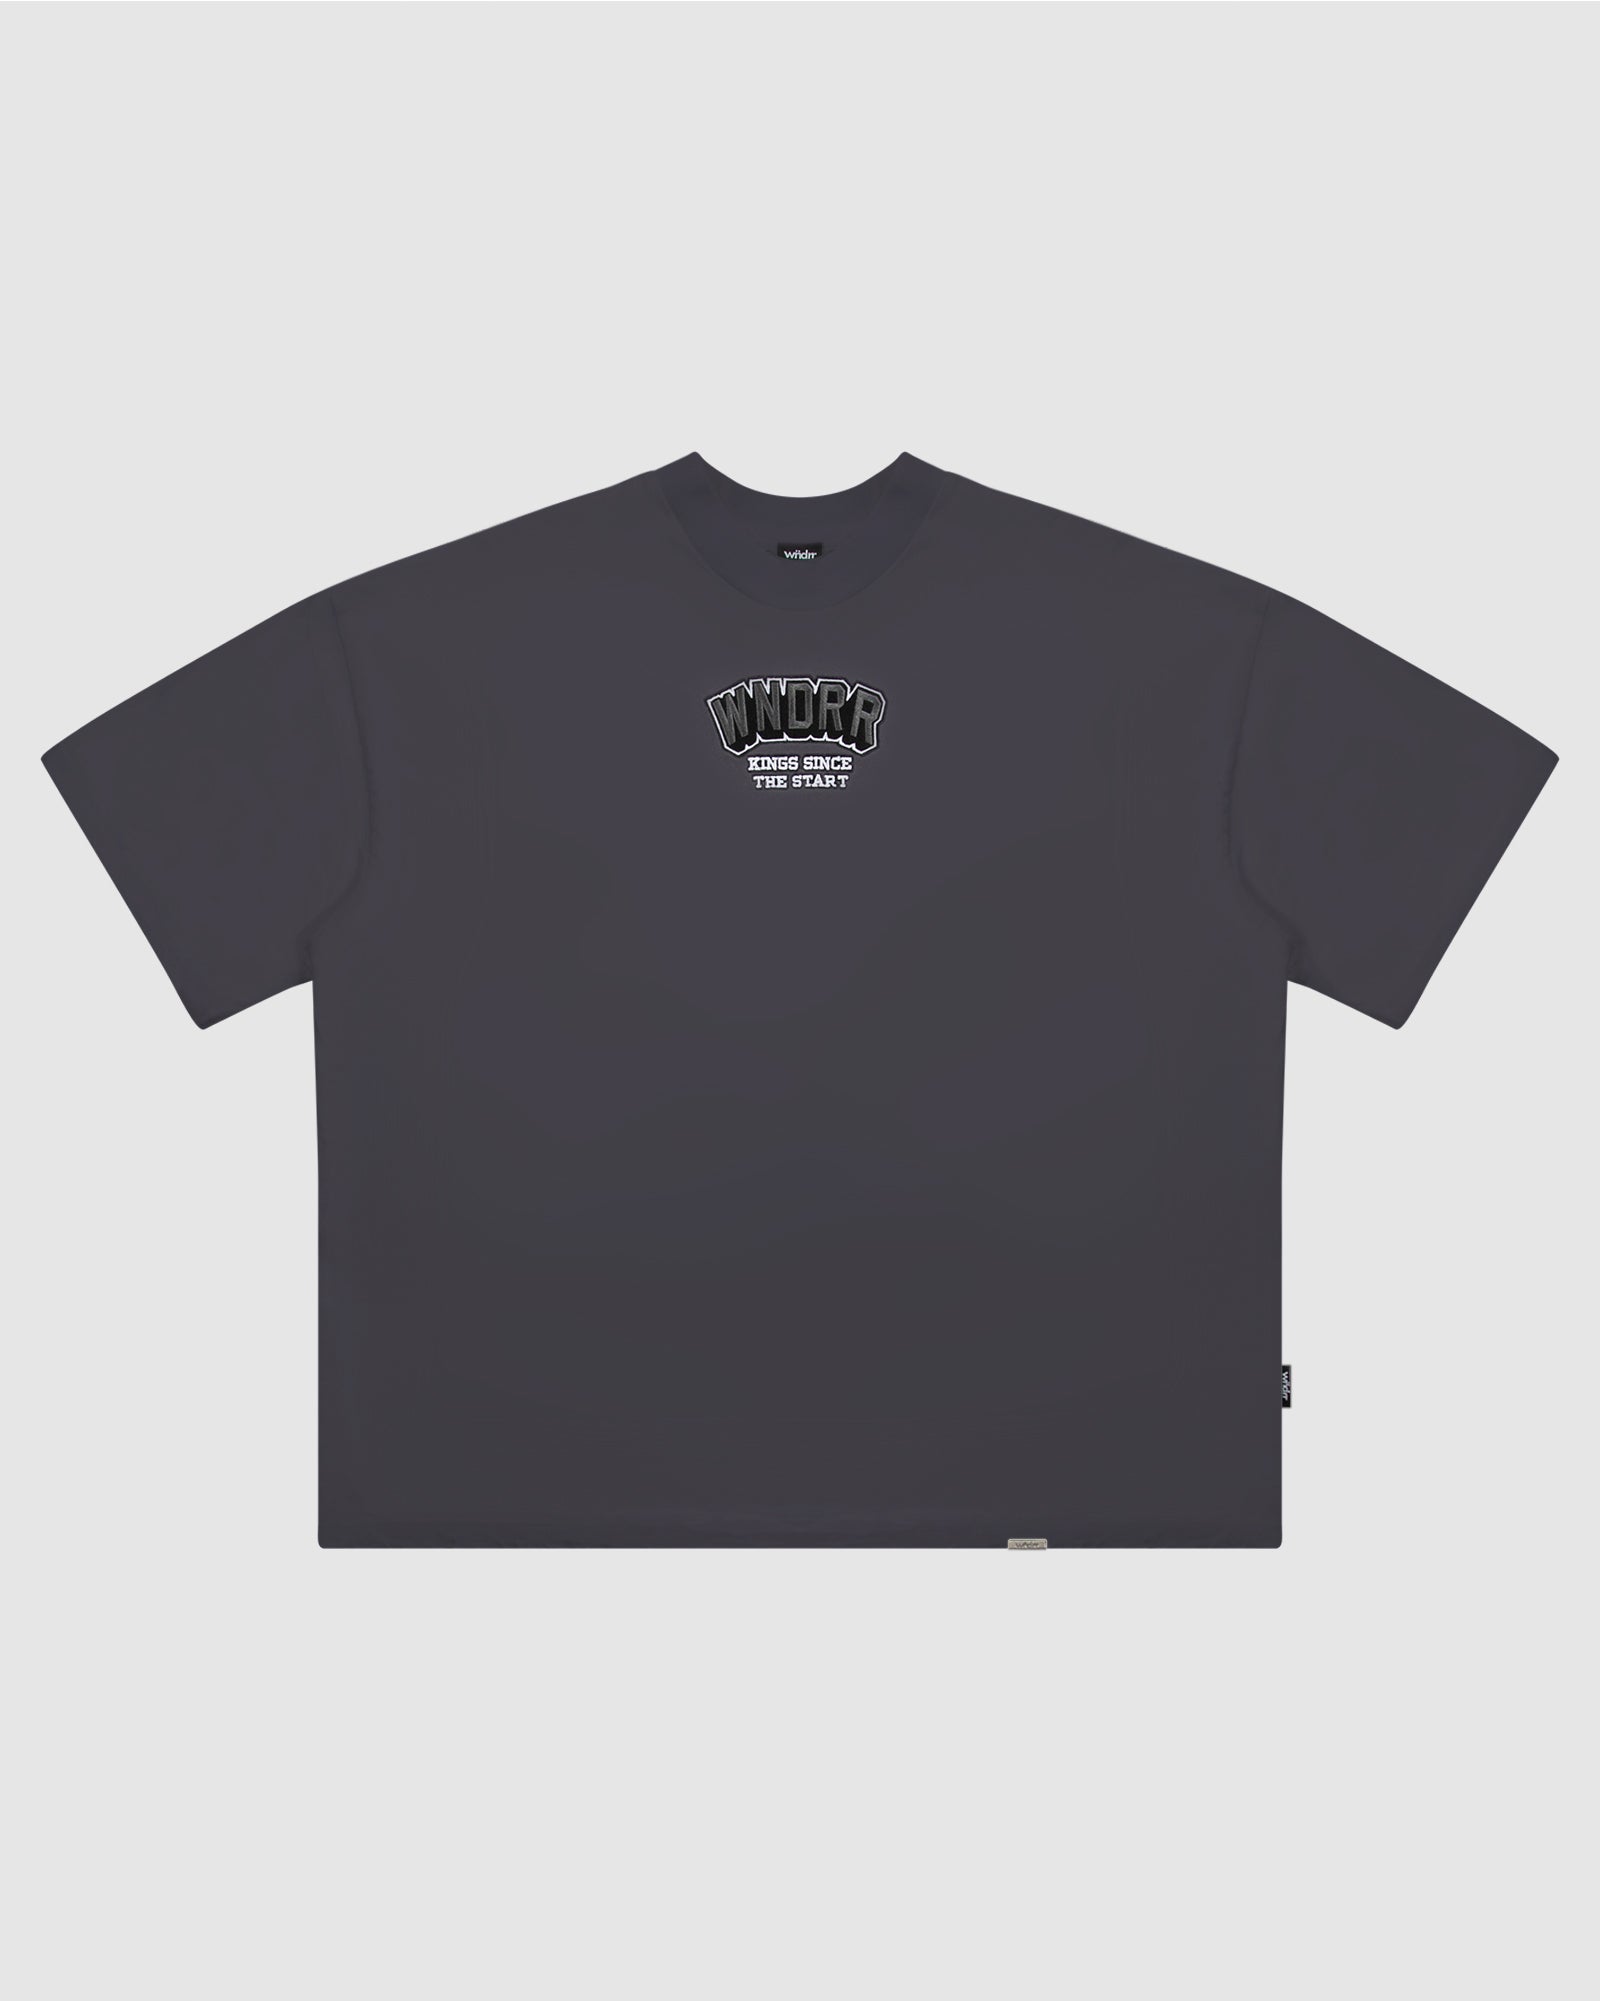 ALL ROUNDER HEAVY WEIGHT TEE - CHARCOAL